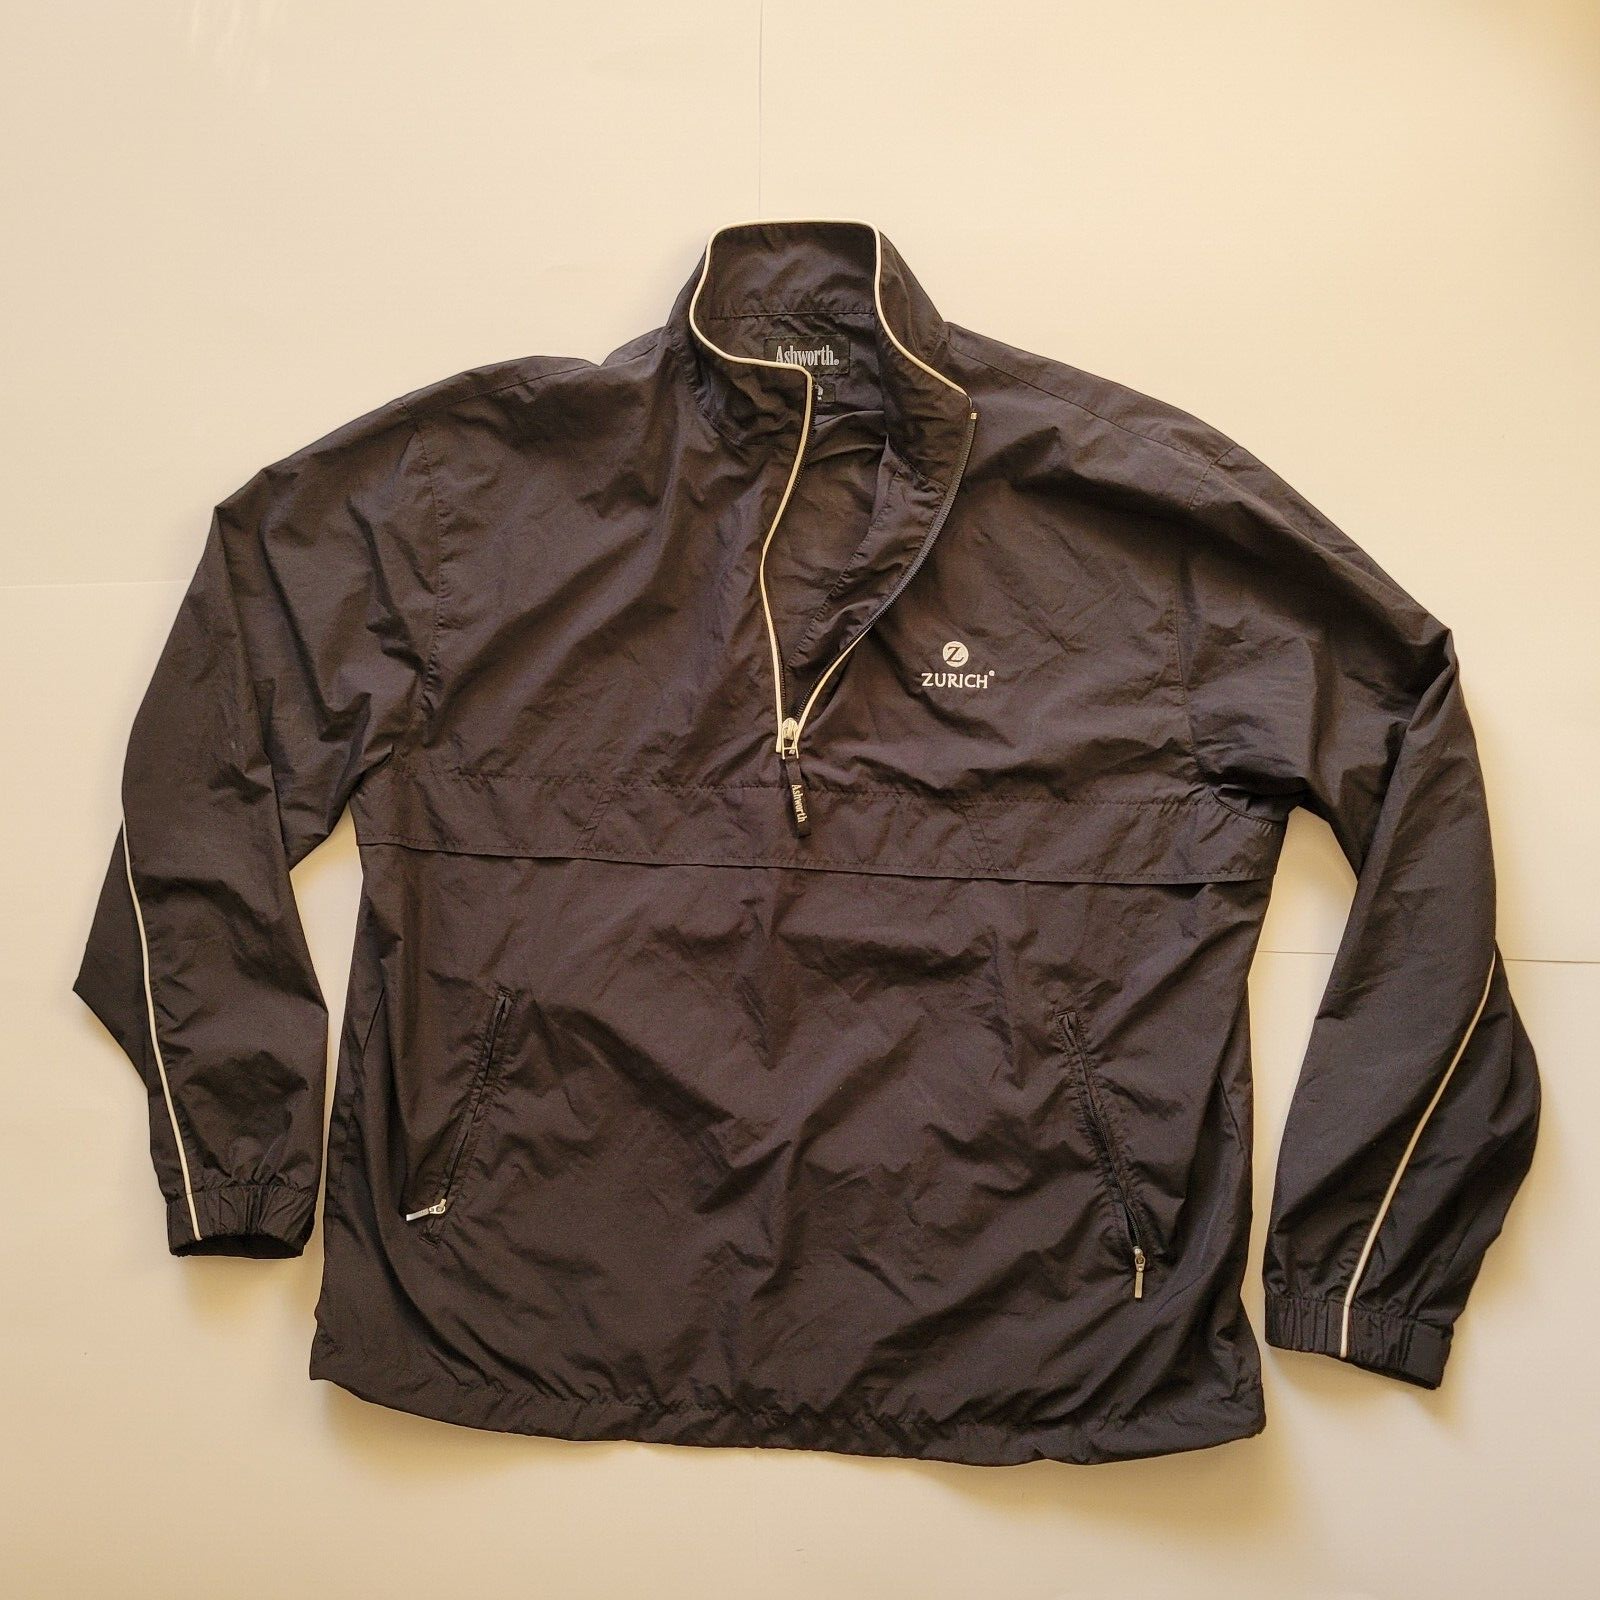 Primary image for Zurich Ashworth Men Size L Black Windbreaker Water Resistant feather light